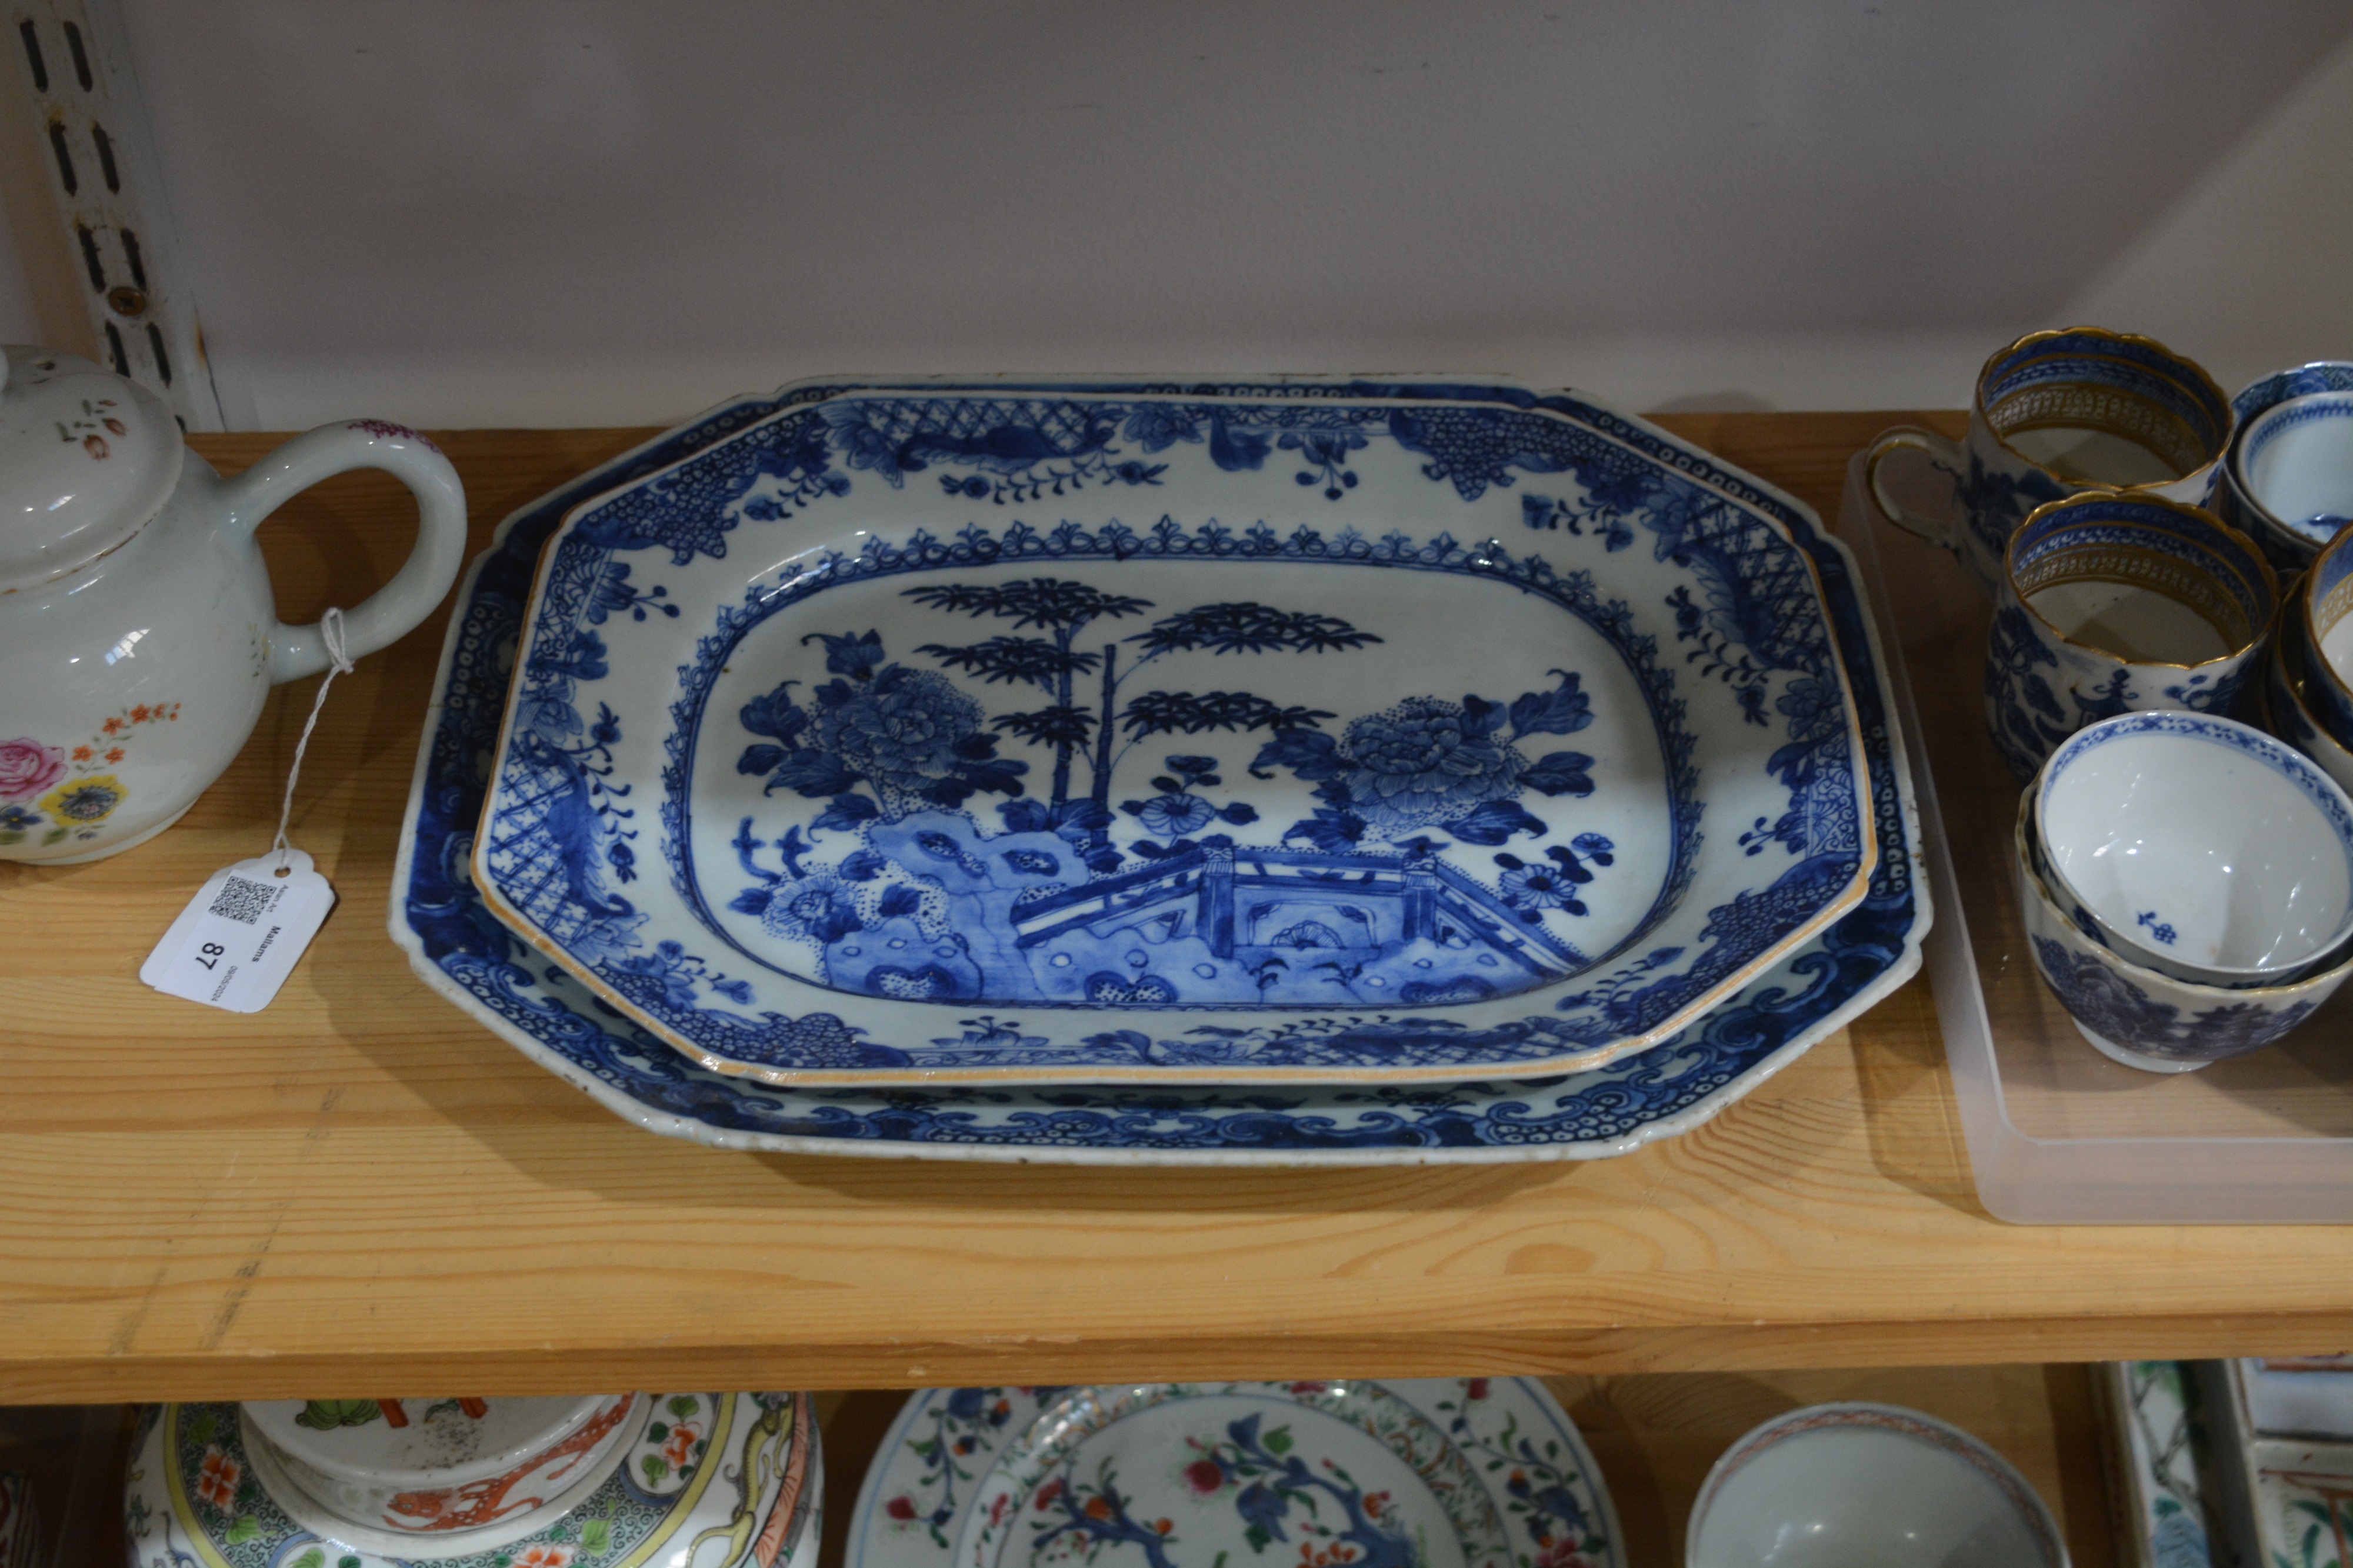 Four similar graduated blue and white porcelain serving dishes Chinese, circa 1900 with various - Image 6 of 8